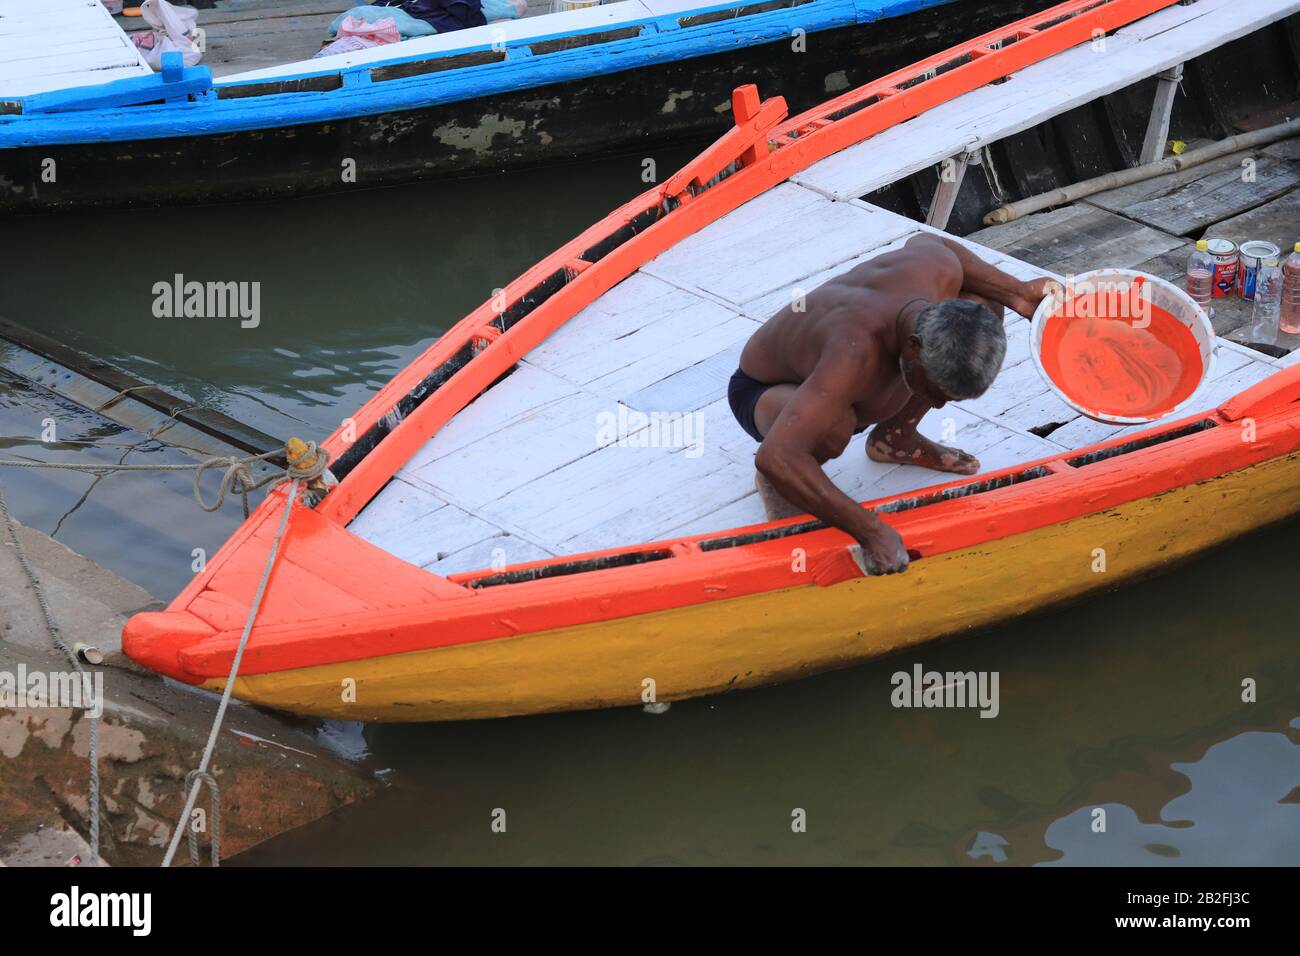 An Indian man painting his boat with orange color Stock Photo